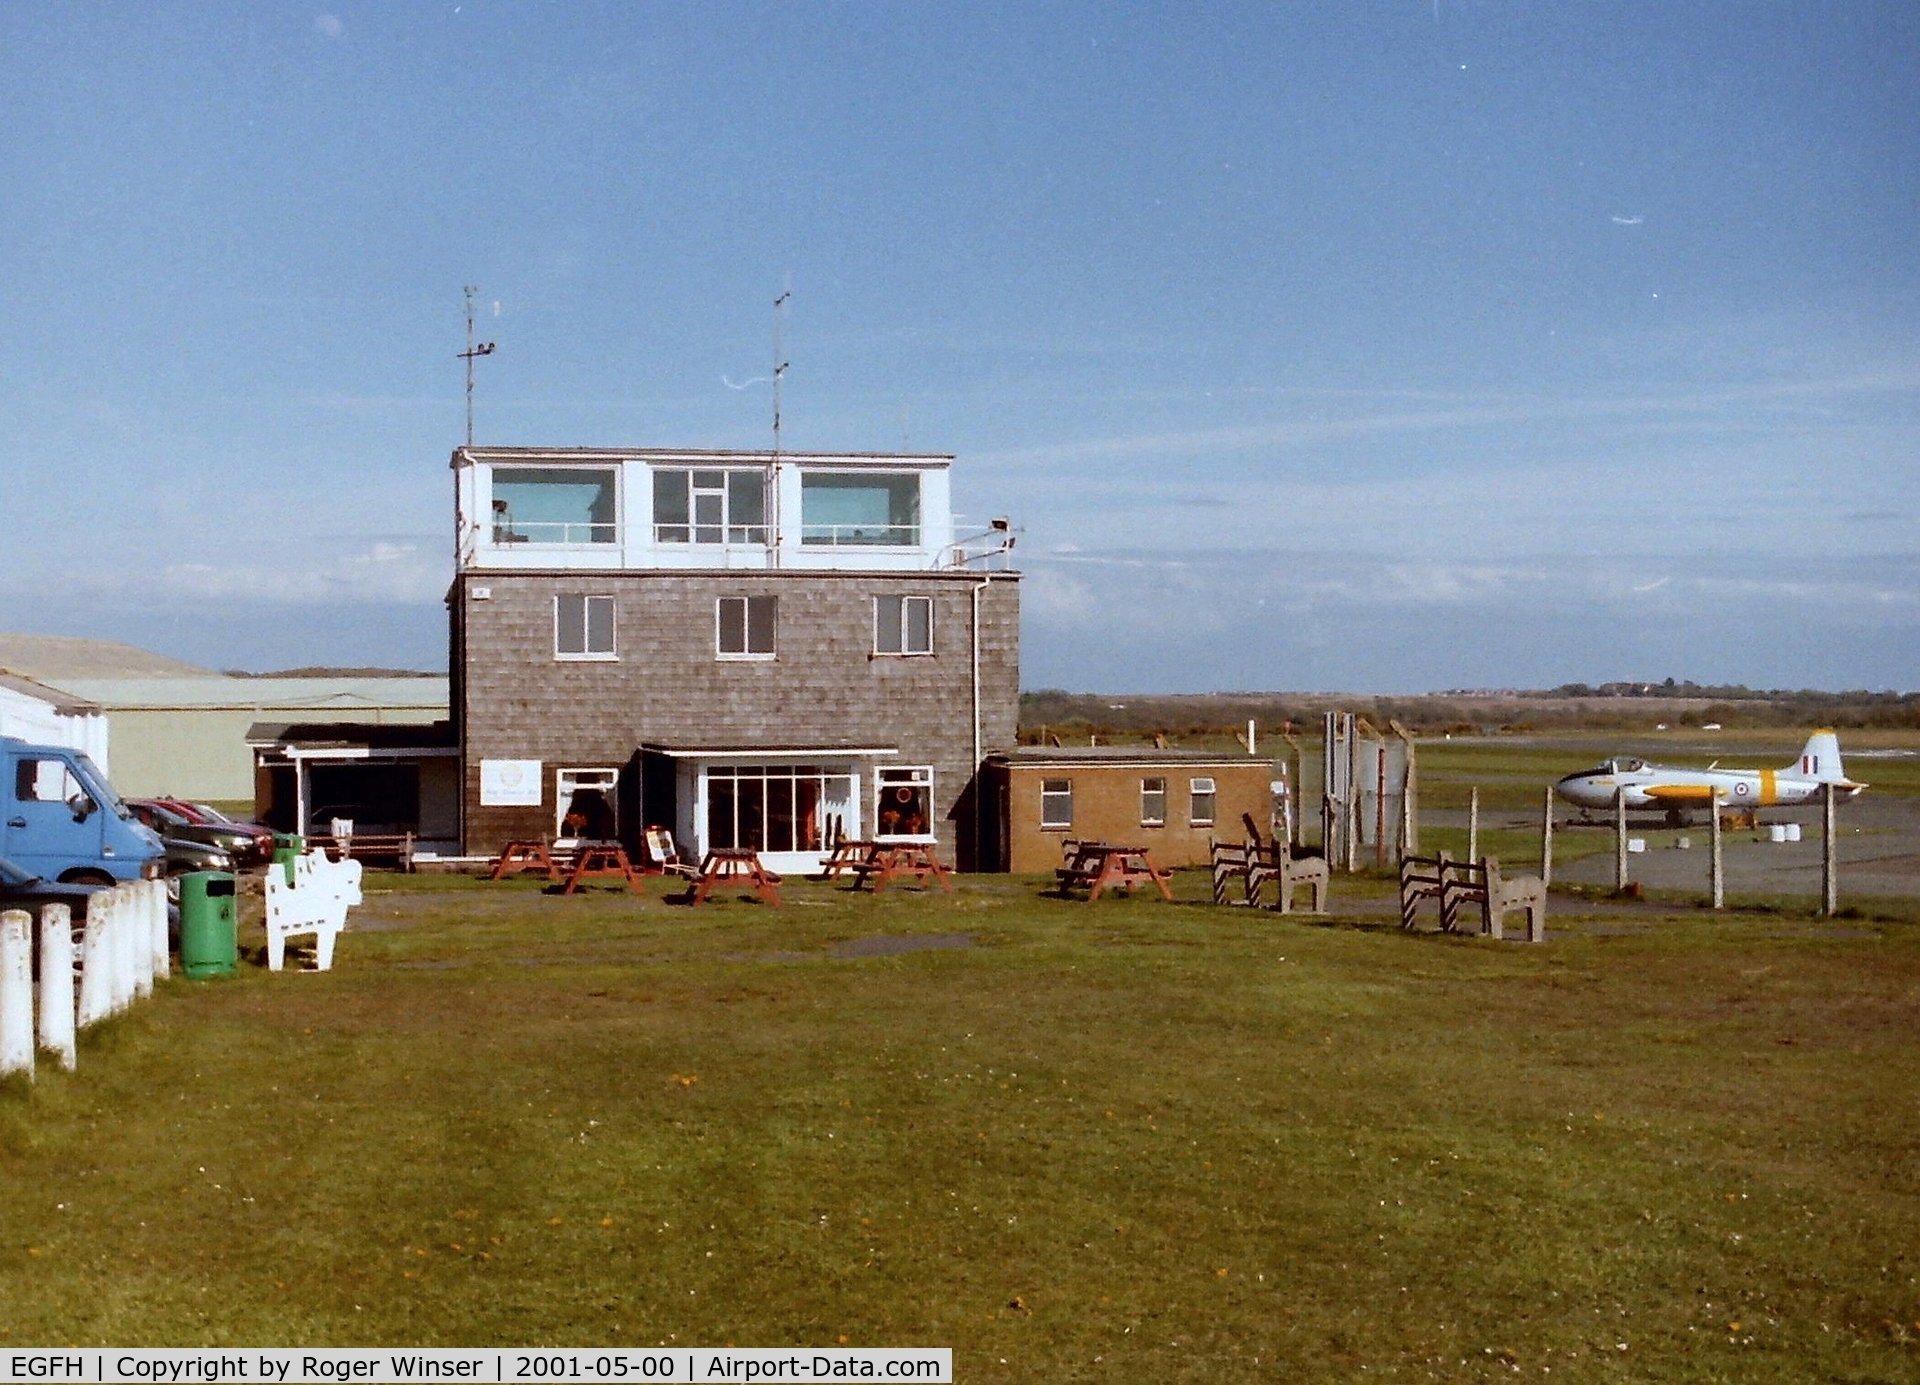 Swansea Airport, Swansea, Wales United Kingdom (EGFH) - Former RAF Control Tower built in 1941 and still in use. Spring sunshine, probably May 2001.